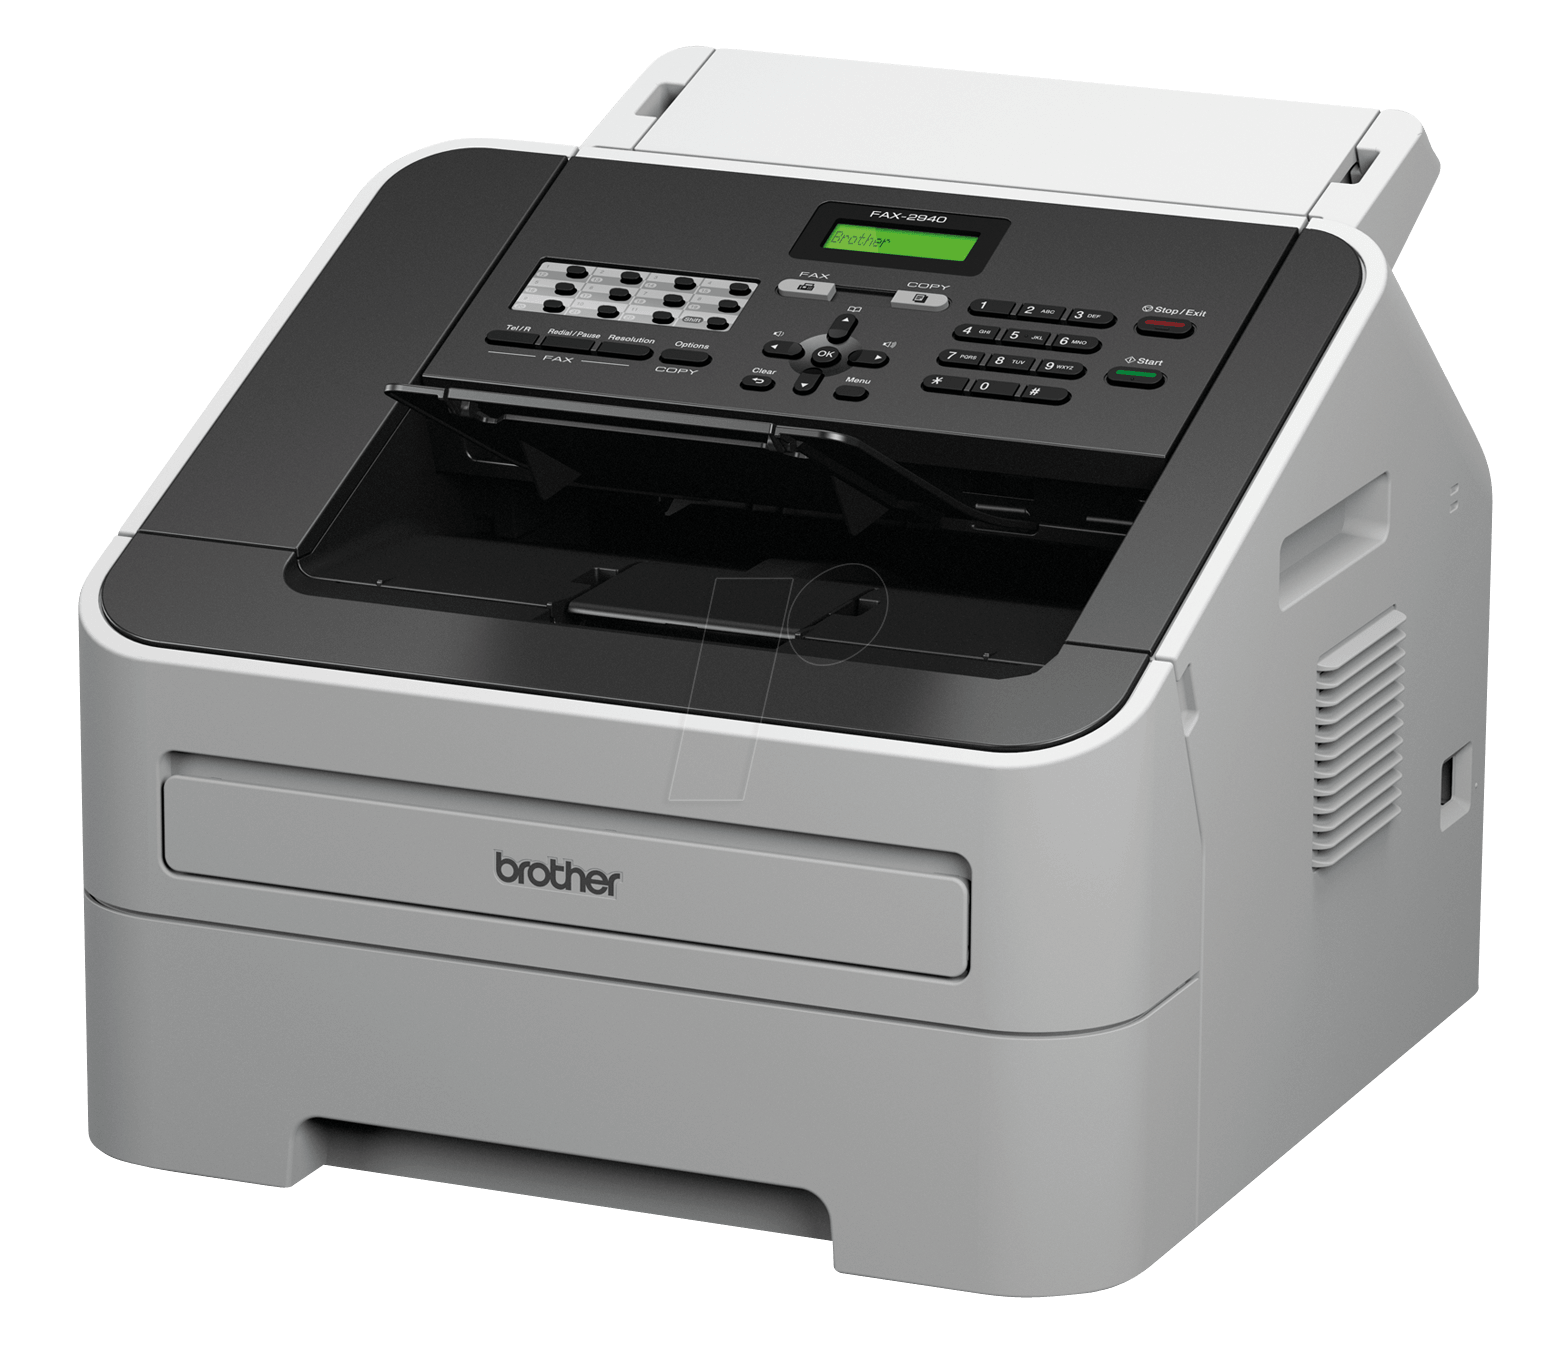 Brother Fax Machine Brother Fax2940G1 - Fax Machine, Transparent background PNG HD thumbnail